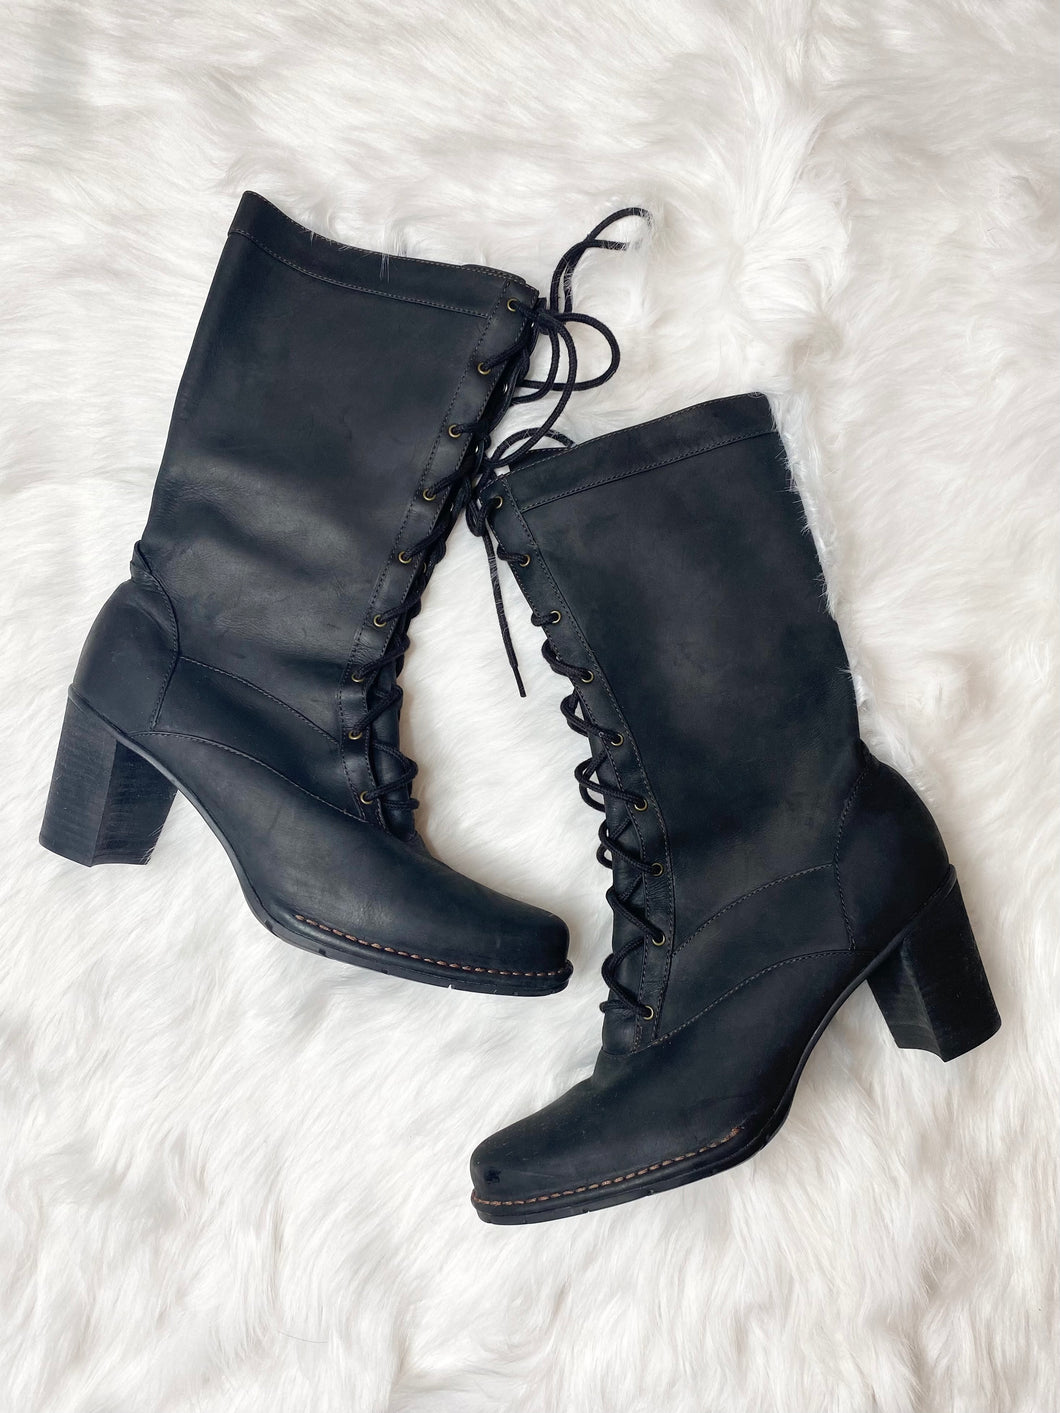 Black Lace-up Boots by Clark’s INDIGO (US11)